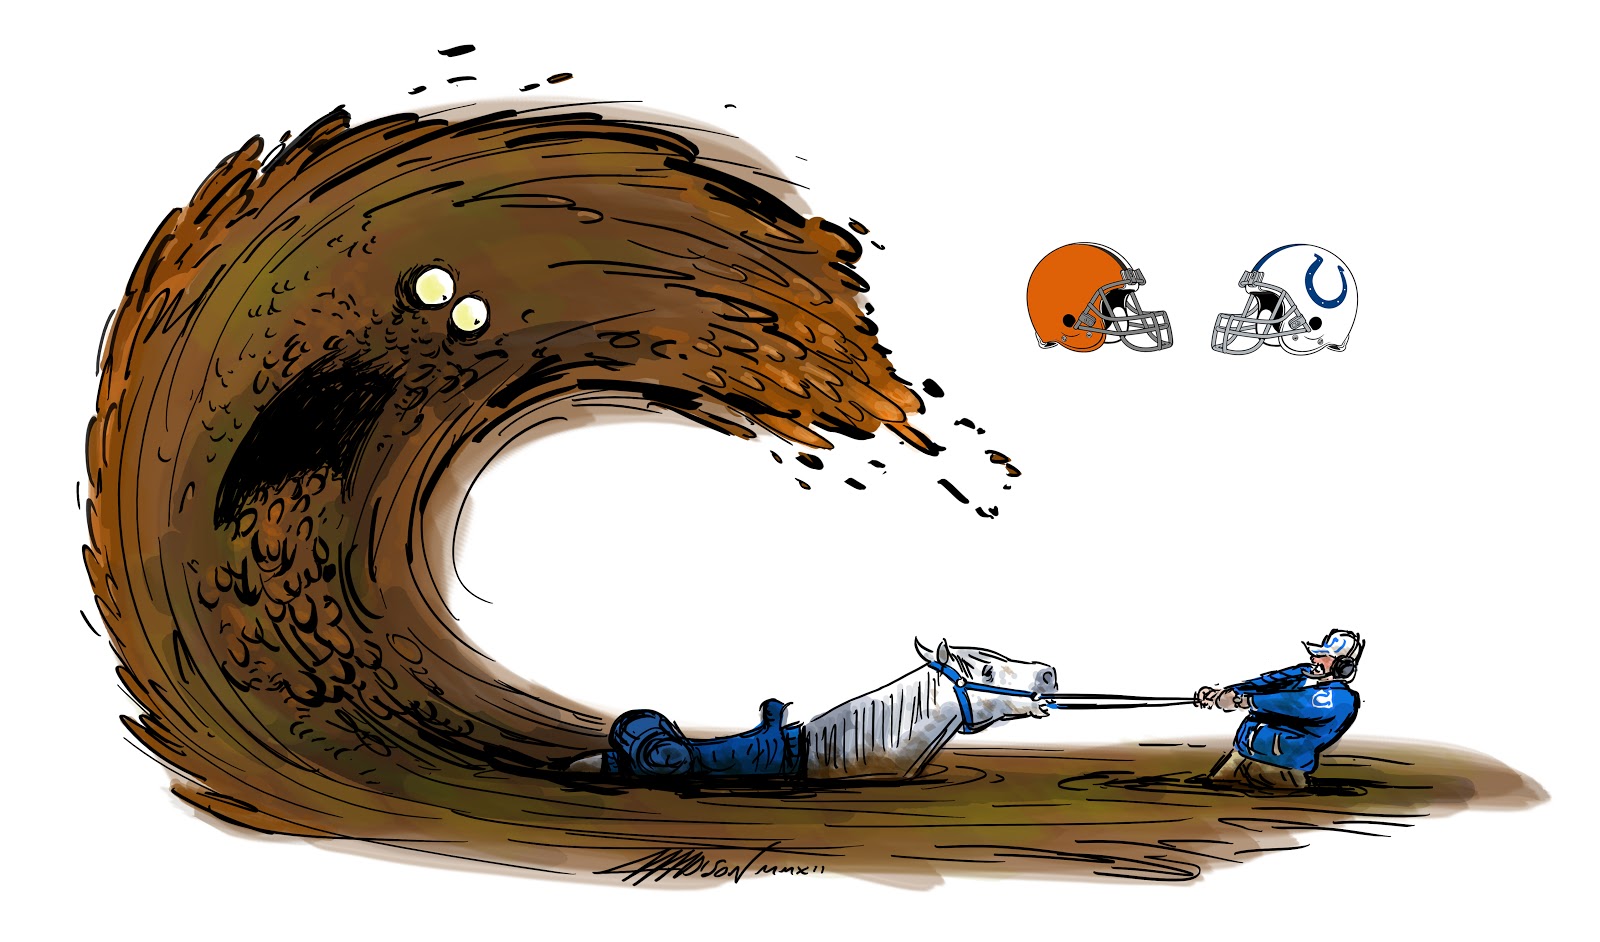 Browns vs. Colts